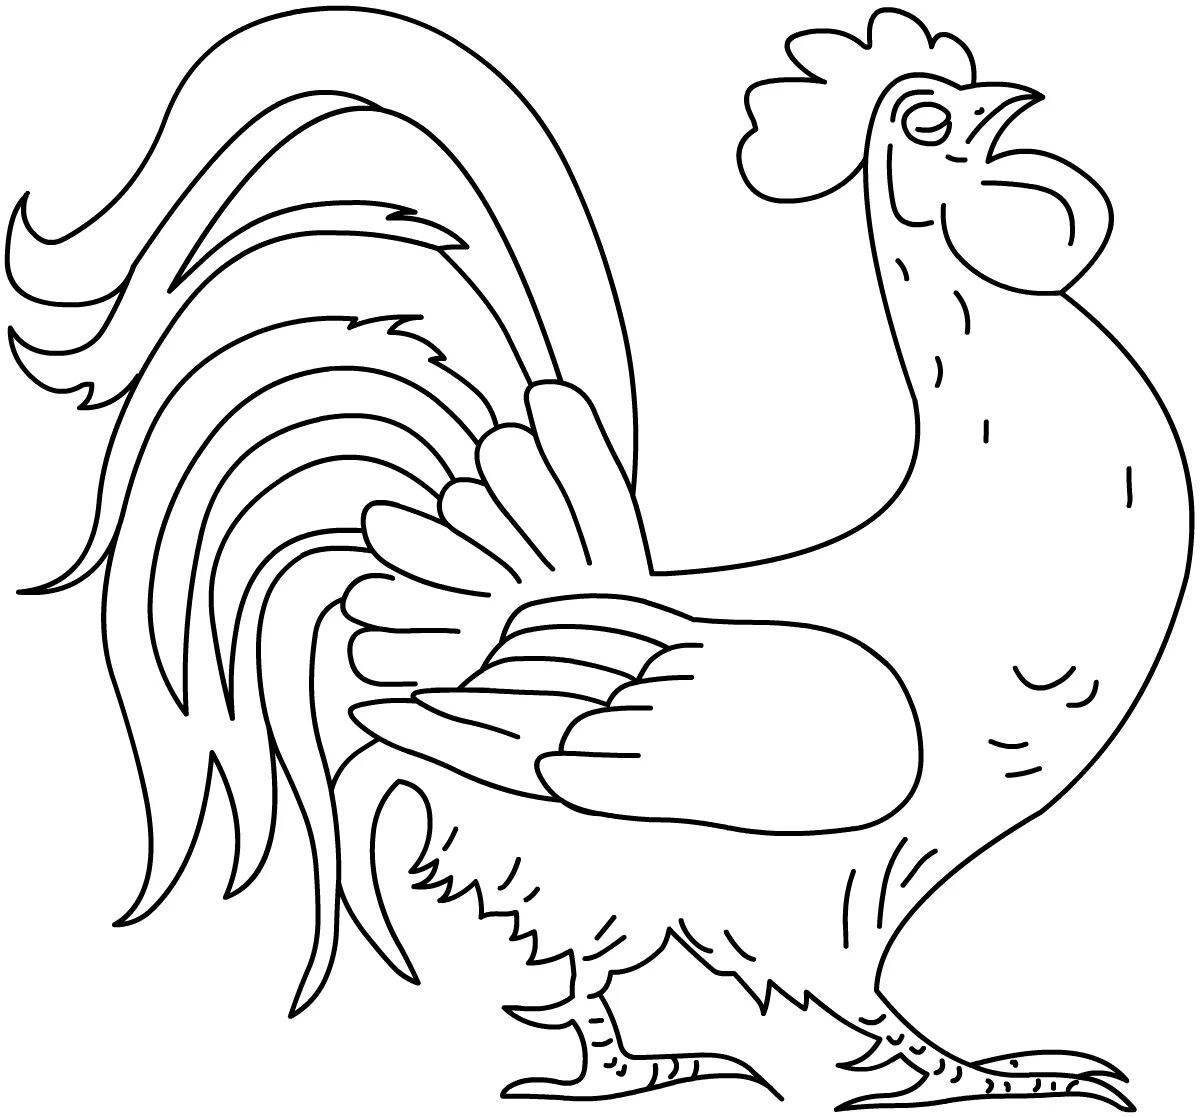 Fun coloring of a rooster for kids